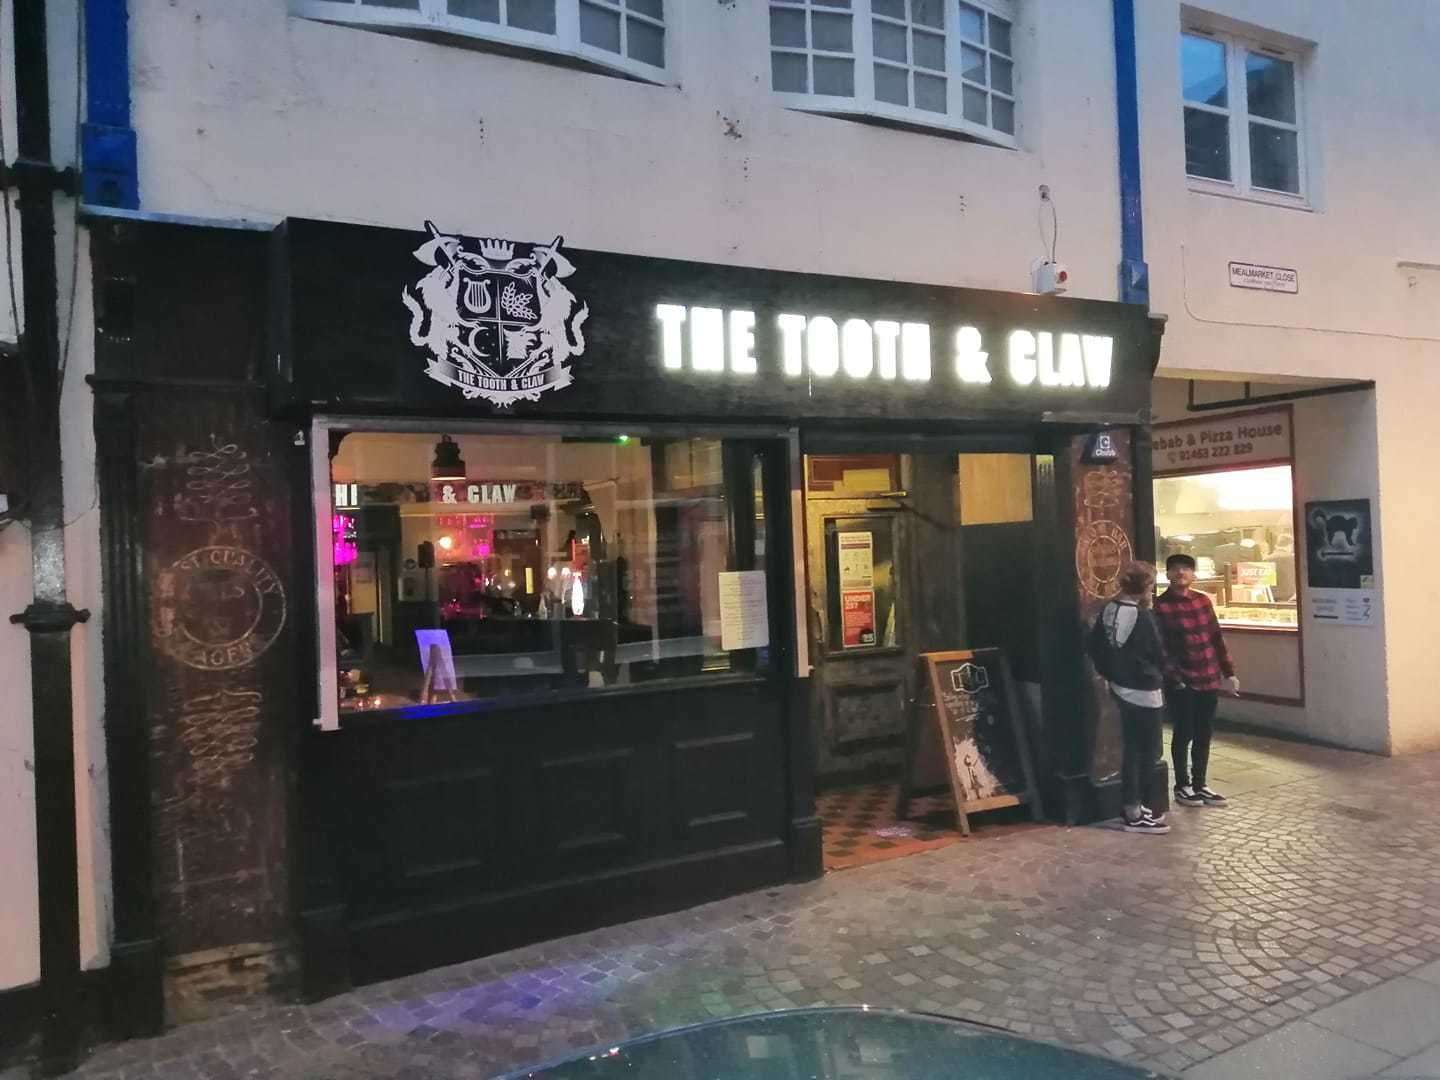 The Tooth and Claw.